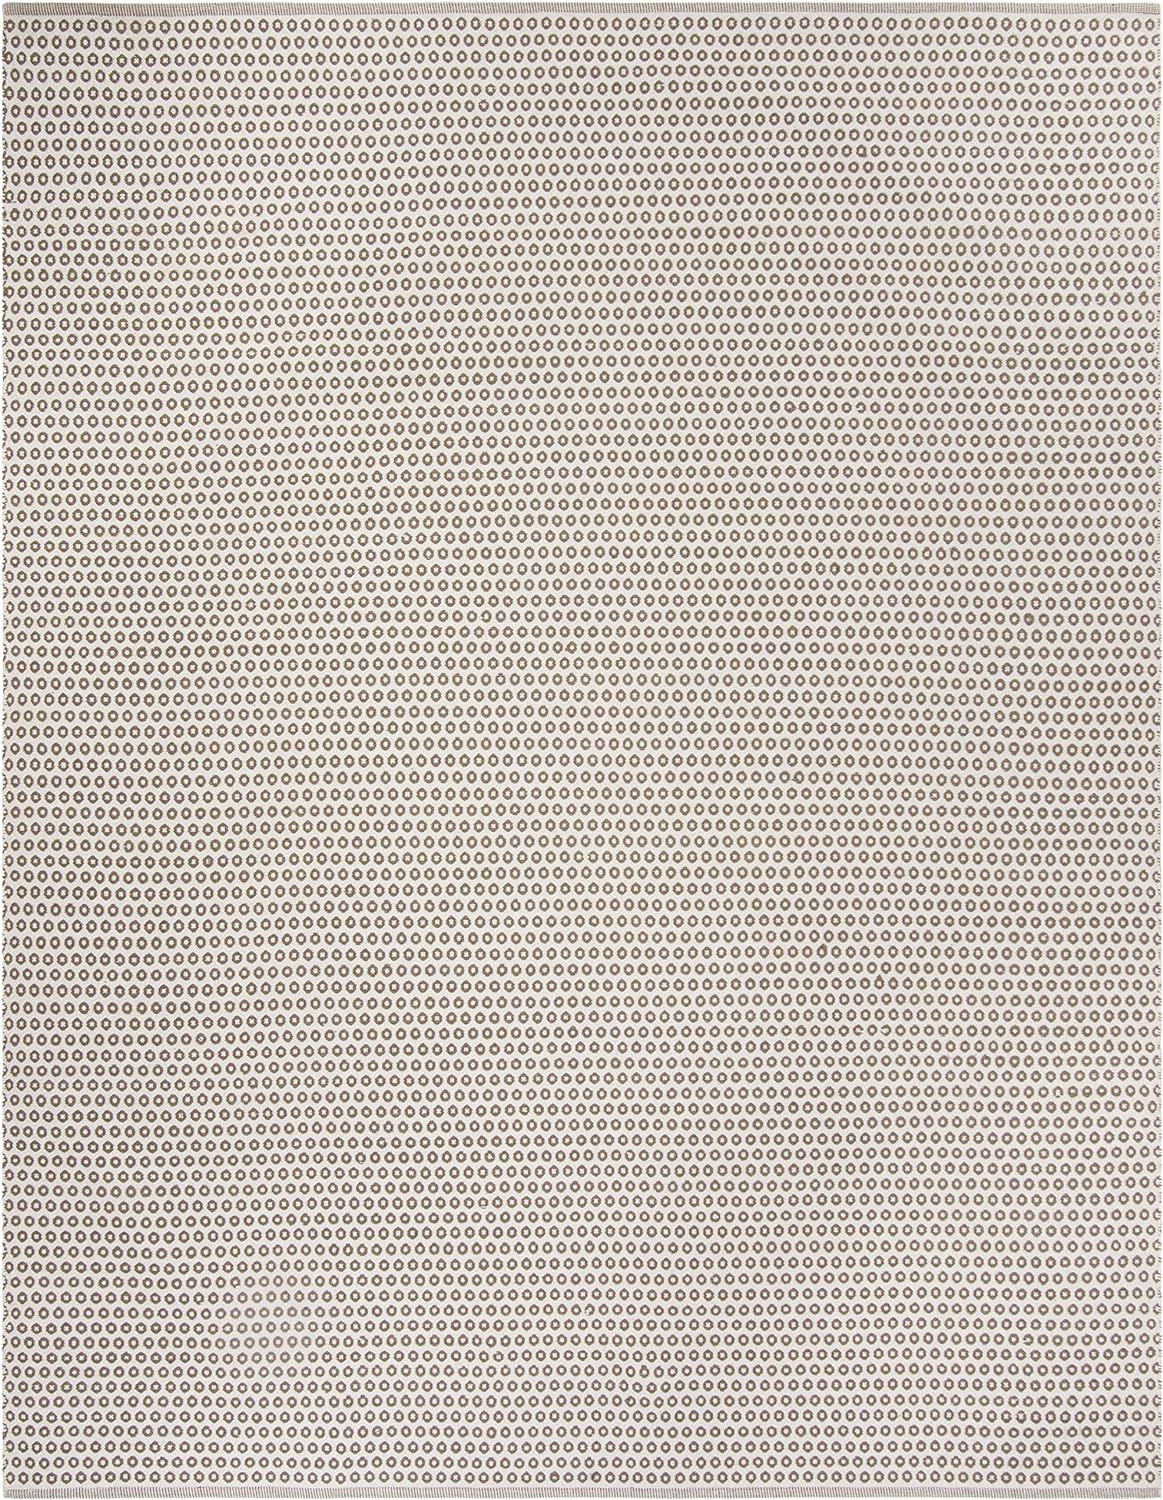 SAFAVIEH Montauk Collection Area Rug - 8' x 10', Taupe & Ivory, Handmade Cotton, Ideal for High T... | Amazon (US)